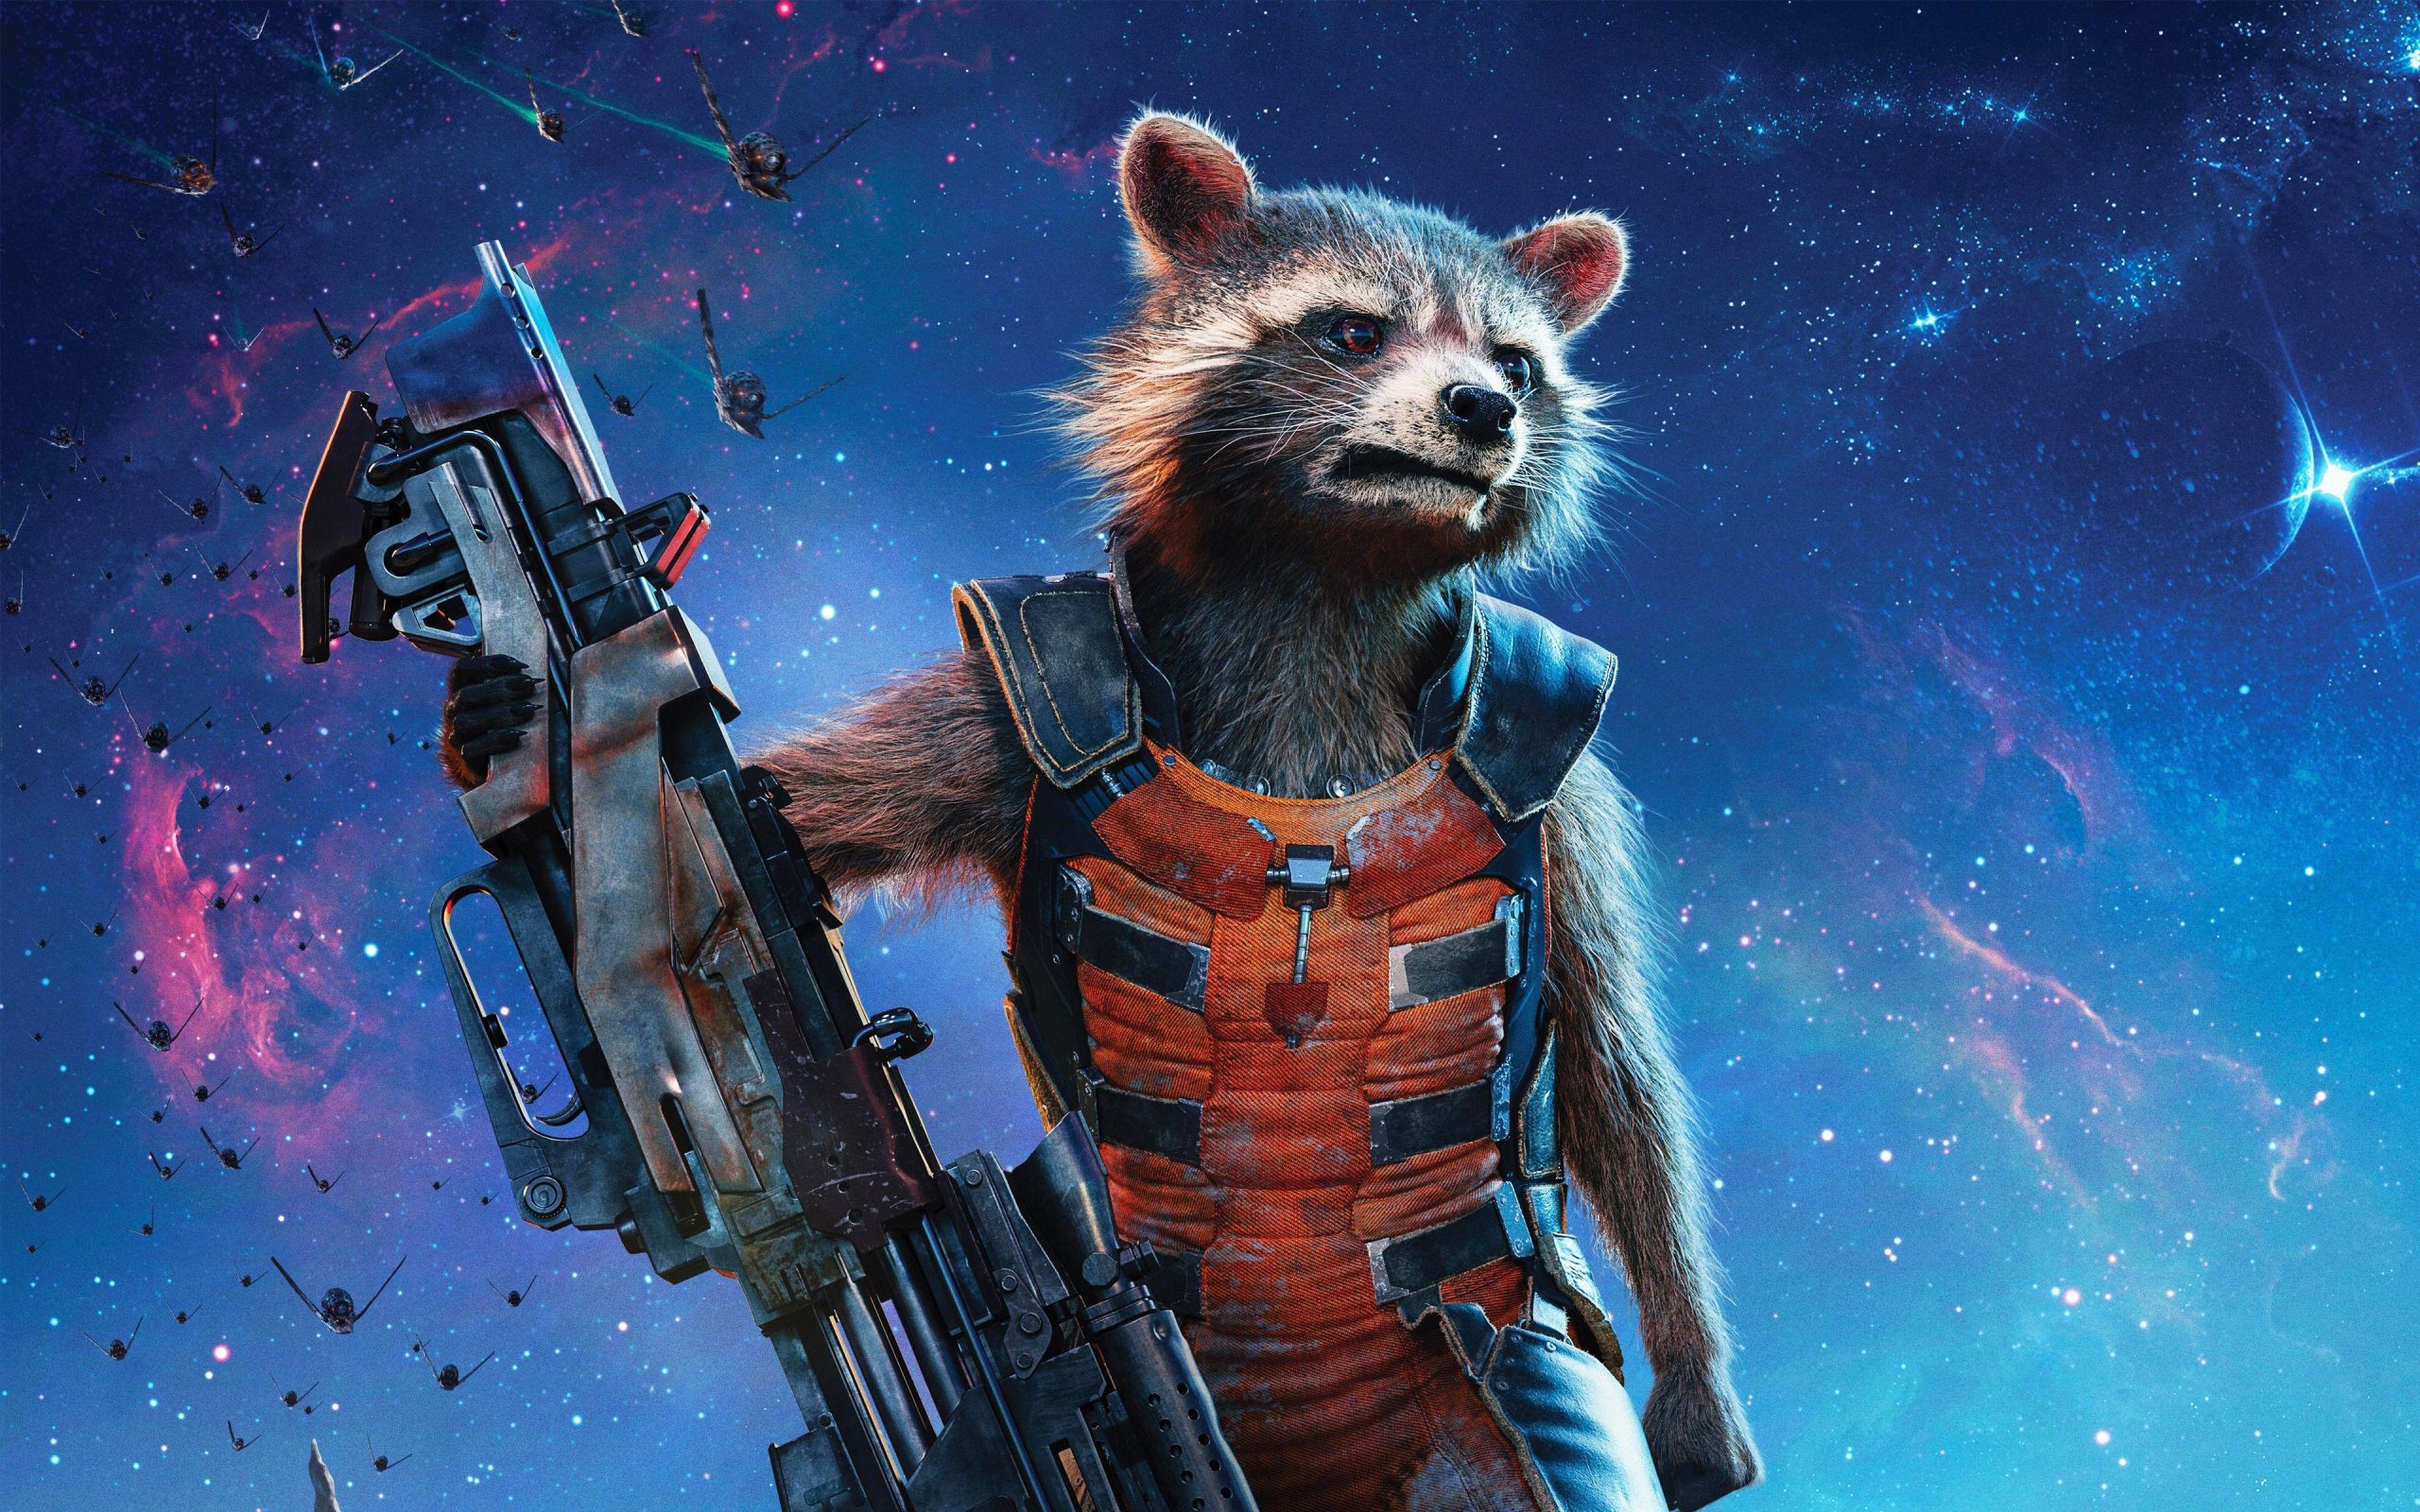 Guardians Of The Galaxy Spaceship cool wallpaper, Guardians Of The Galaxy Spaceship, Movies